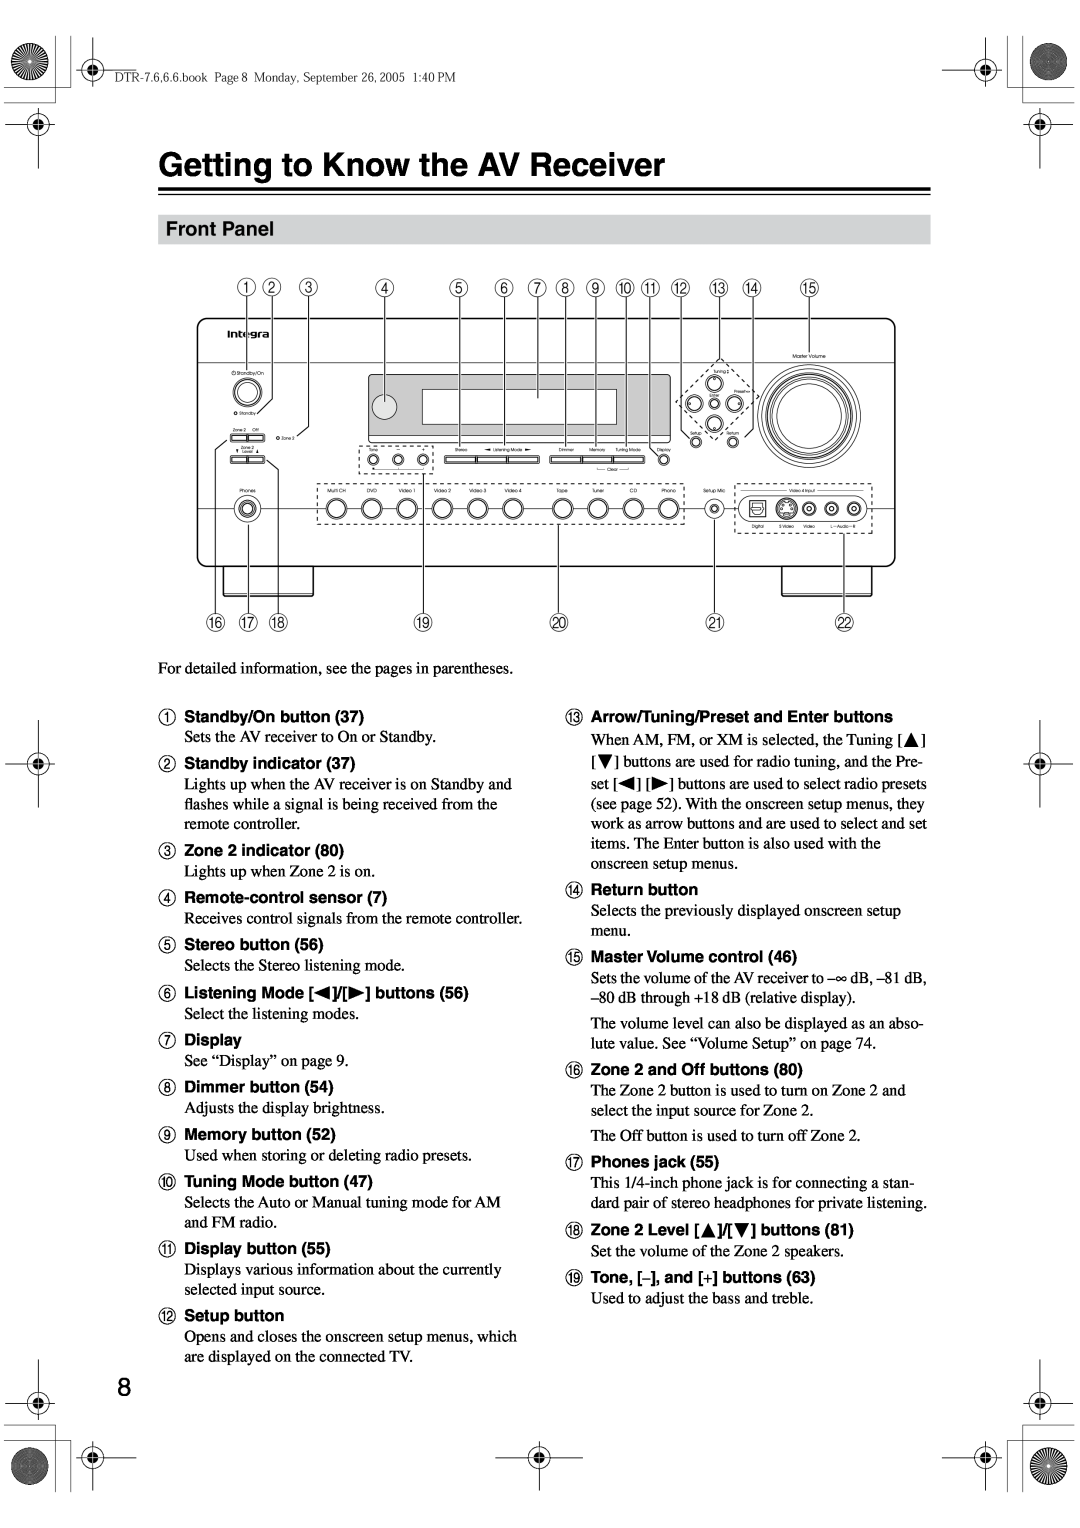 Integra DTR-7.6/6.6 instruction manual Getting to Know the AV Receiver, Front Panel, 1 2 3 4 5 6 7 8 9 J K L M N O, P Q R 